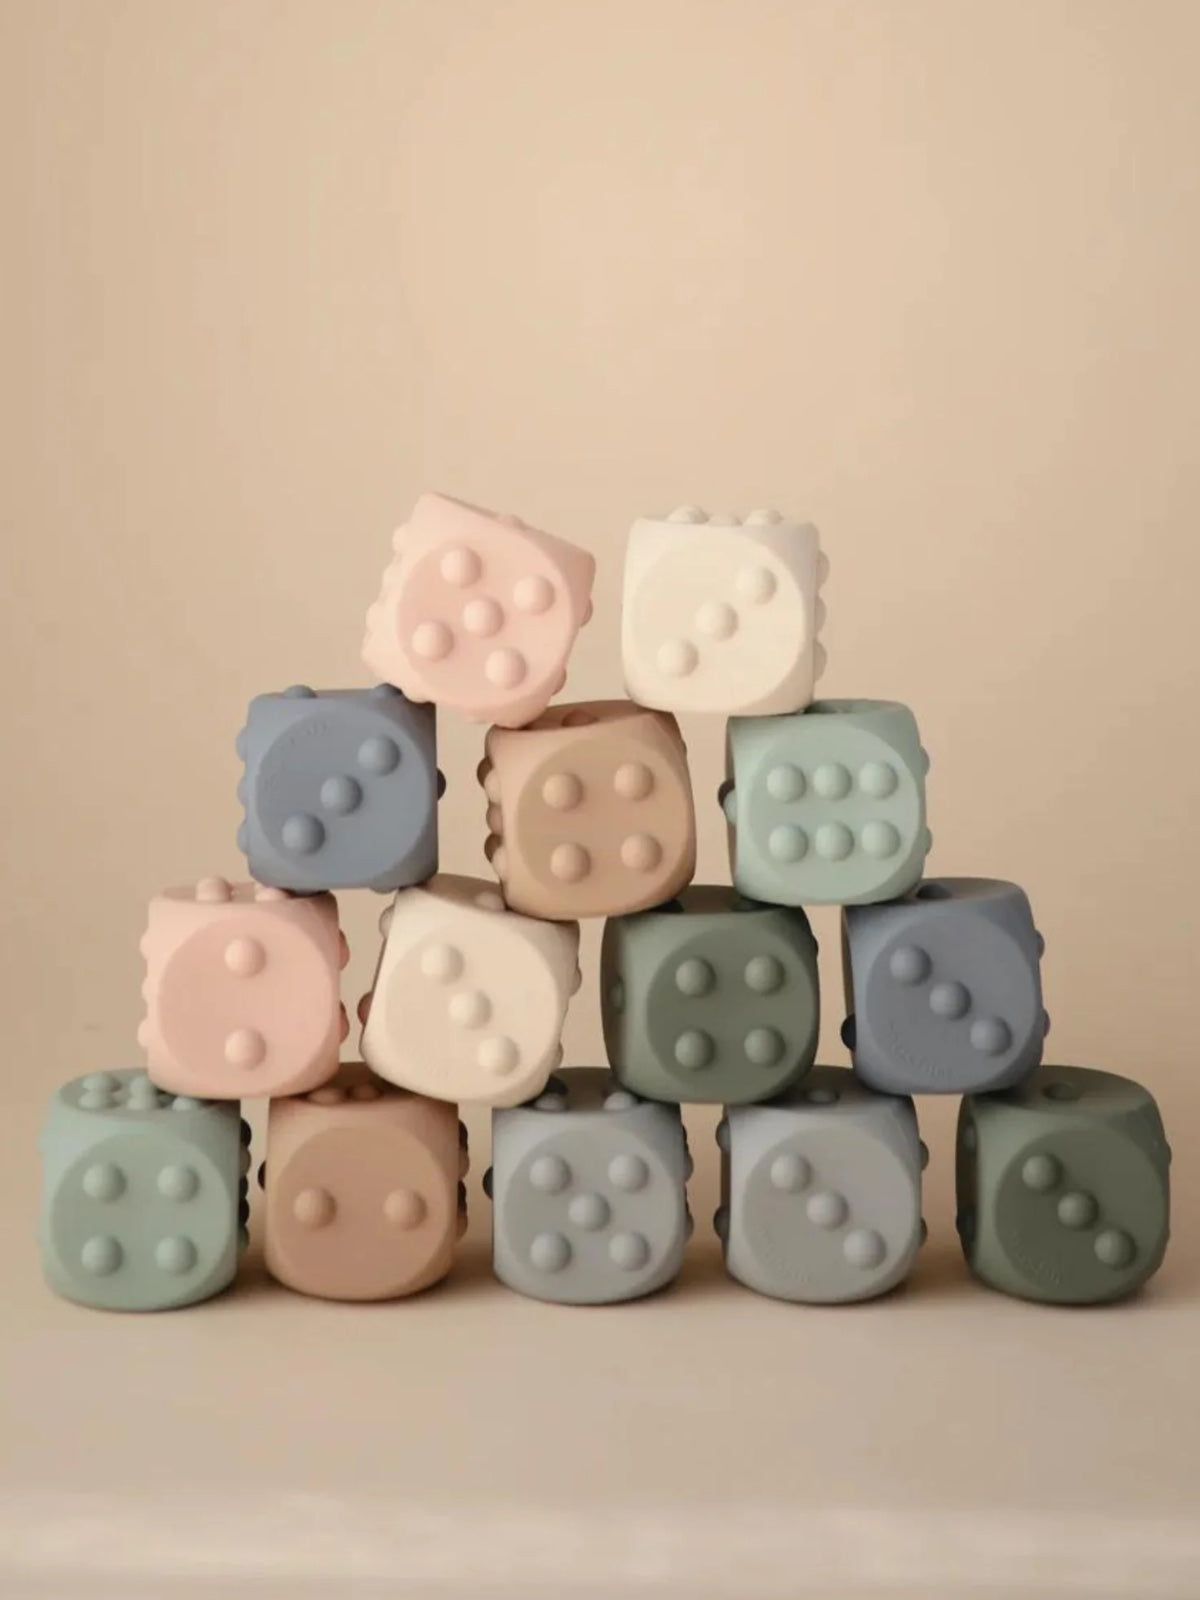 Dice Press Toy 2 Pack, Blush/Shifting Sand